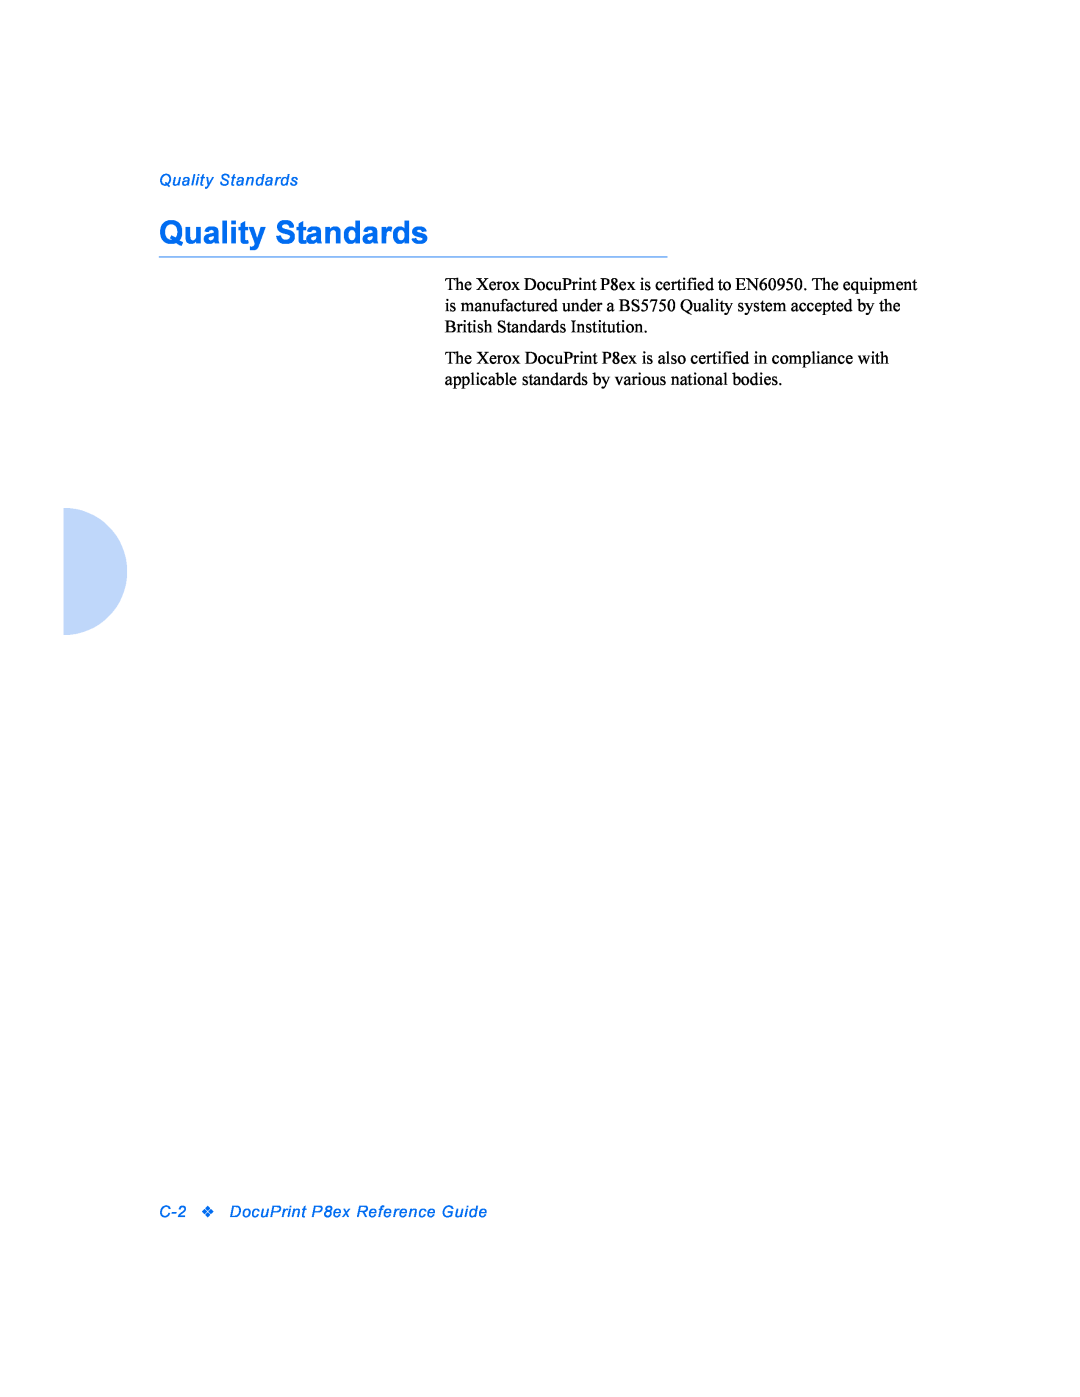 Xerox P8EX manual Quality Standards, C-2DocuPrint P8ex Reference Guide 